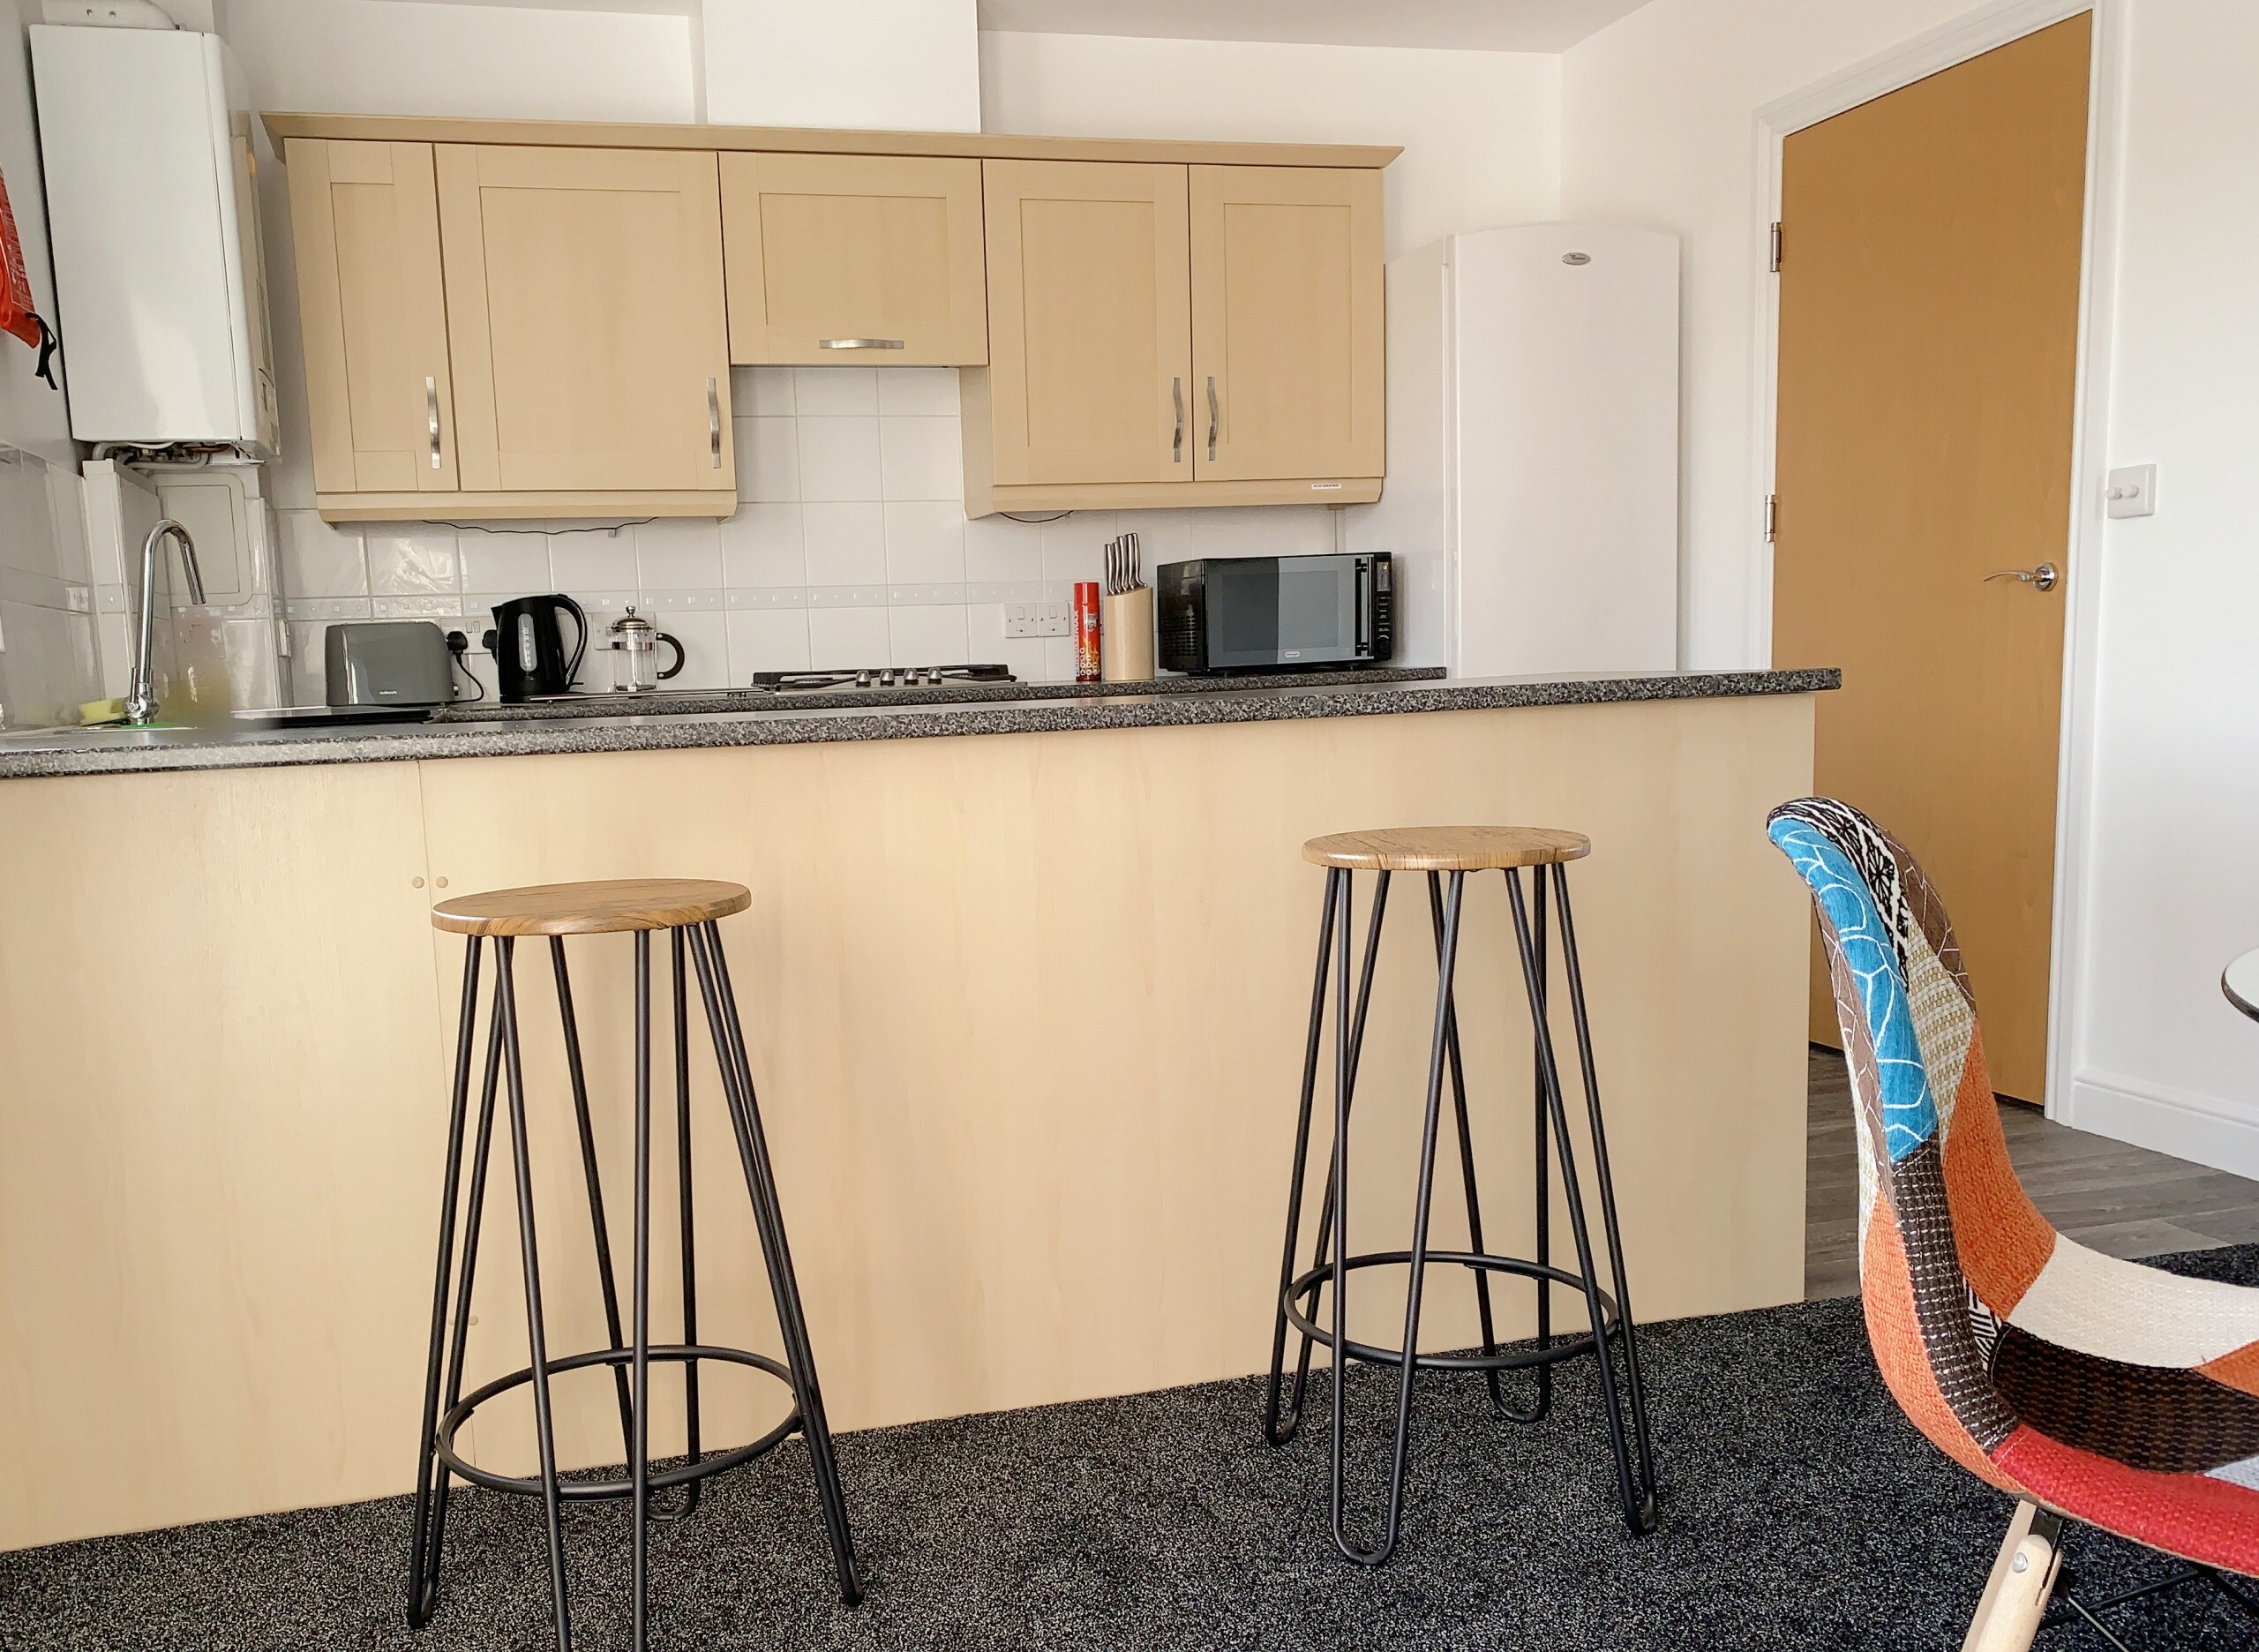 2 Bedroom / 1 Bathroom Duplex (2nd/3rd floor, no lift), with allocated parking space, near to Ipswich Train Station